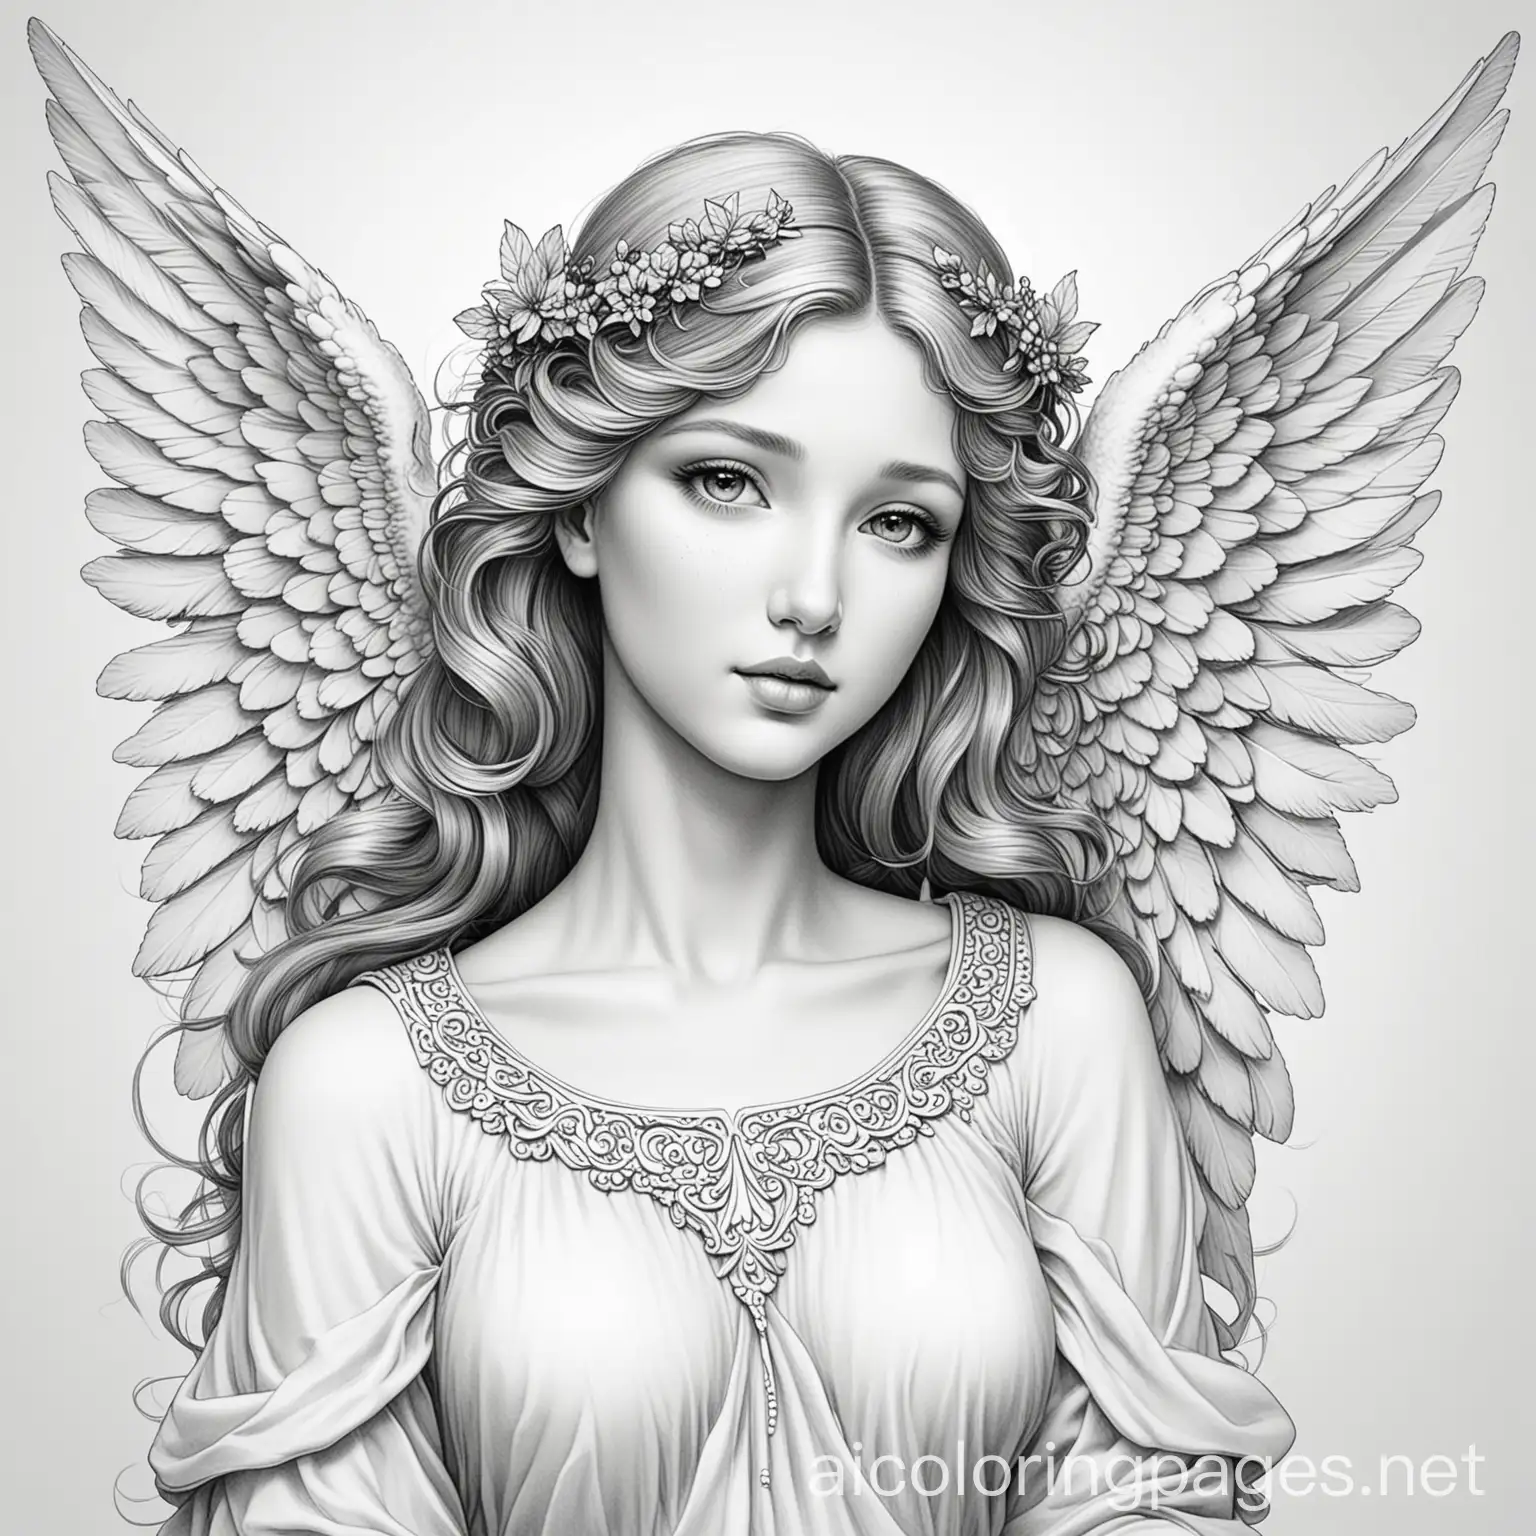 a beautiful angel, Coloring Page, black and white, line art, white background, Simplicity, Ample White Space. The background of the coloring page is plain white to make it easy for young children to color within the lines. The outlines of all the subjects are easy to distinguish, making it simple for kids to color without too much difficulty